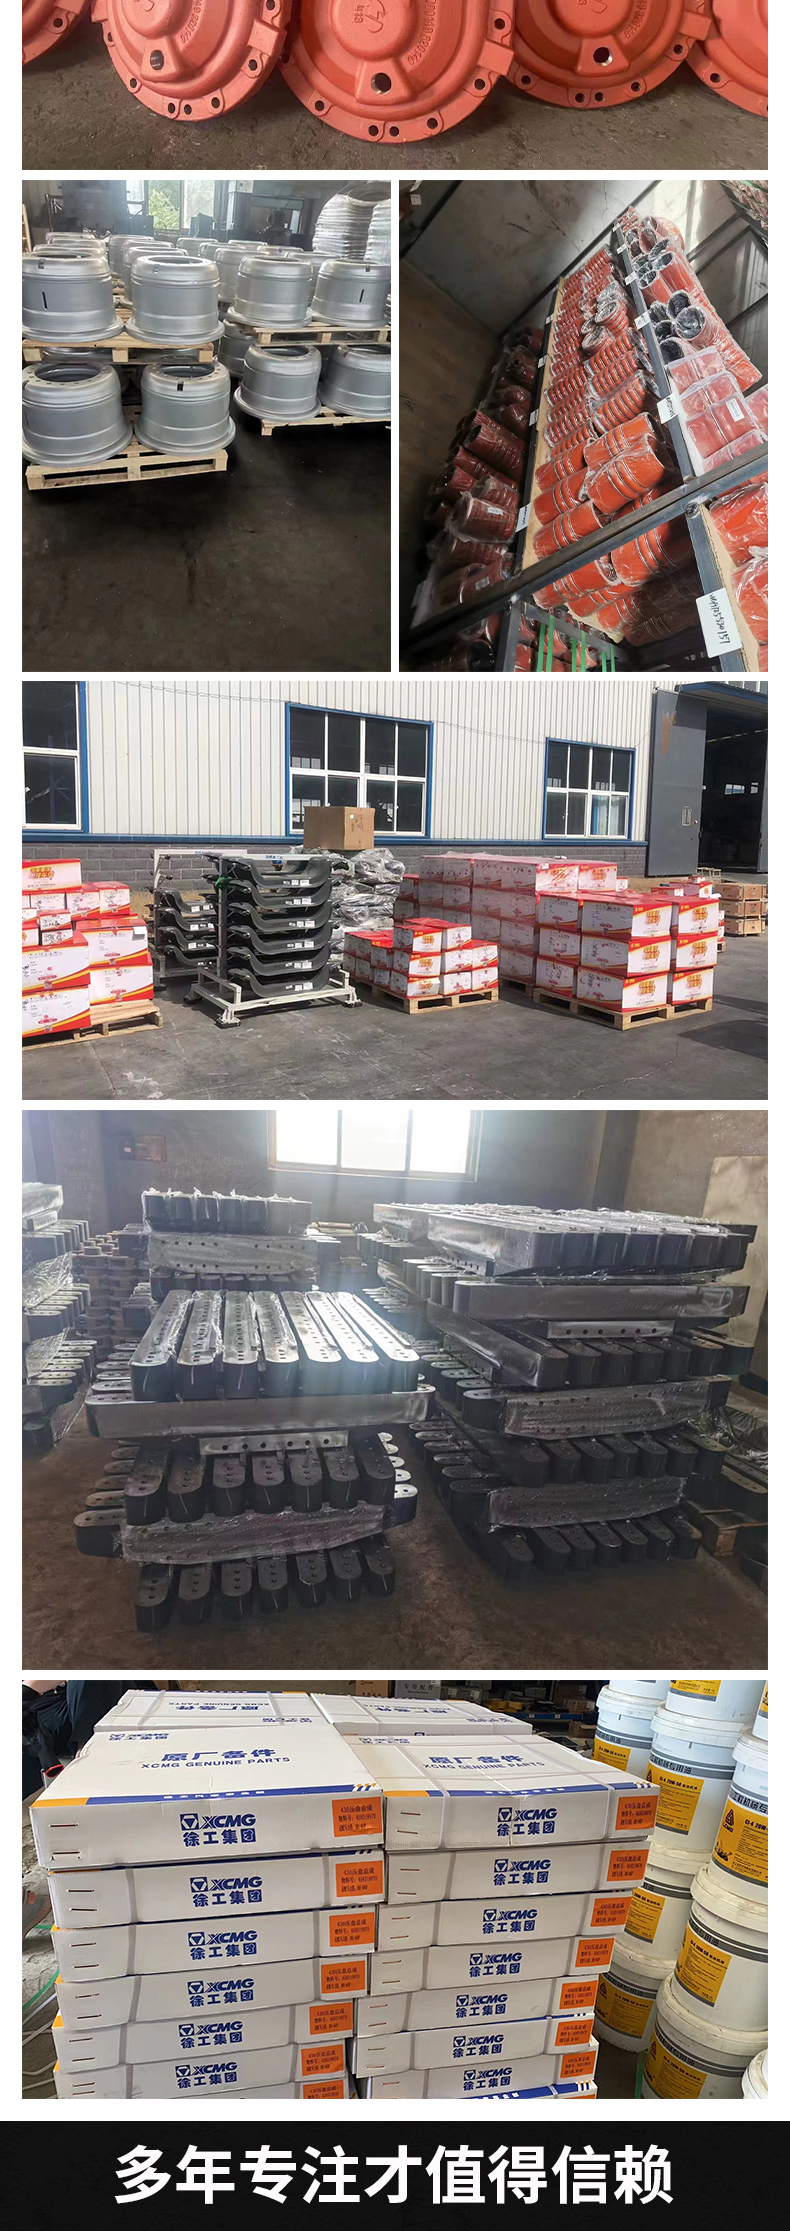 Wholesale supply of Tongli 885 mining wide body vehicle accessories, central control junction box 85038000002